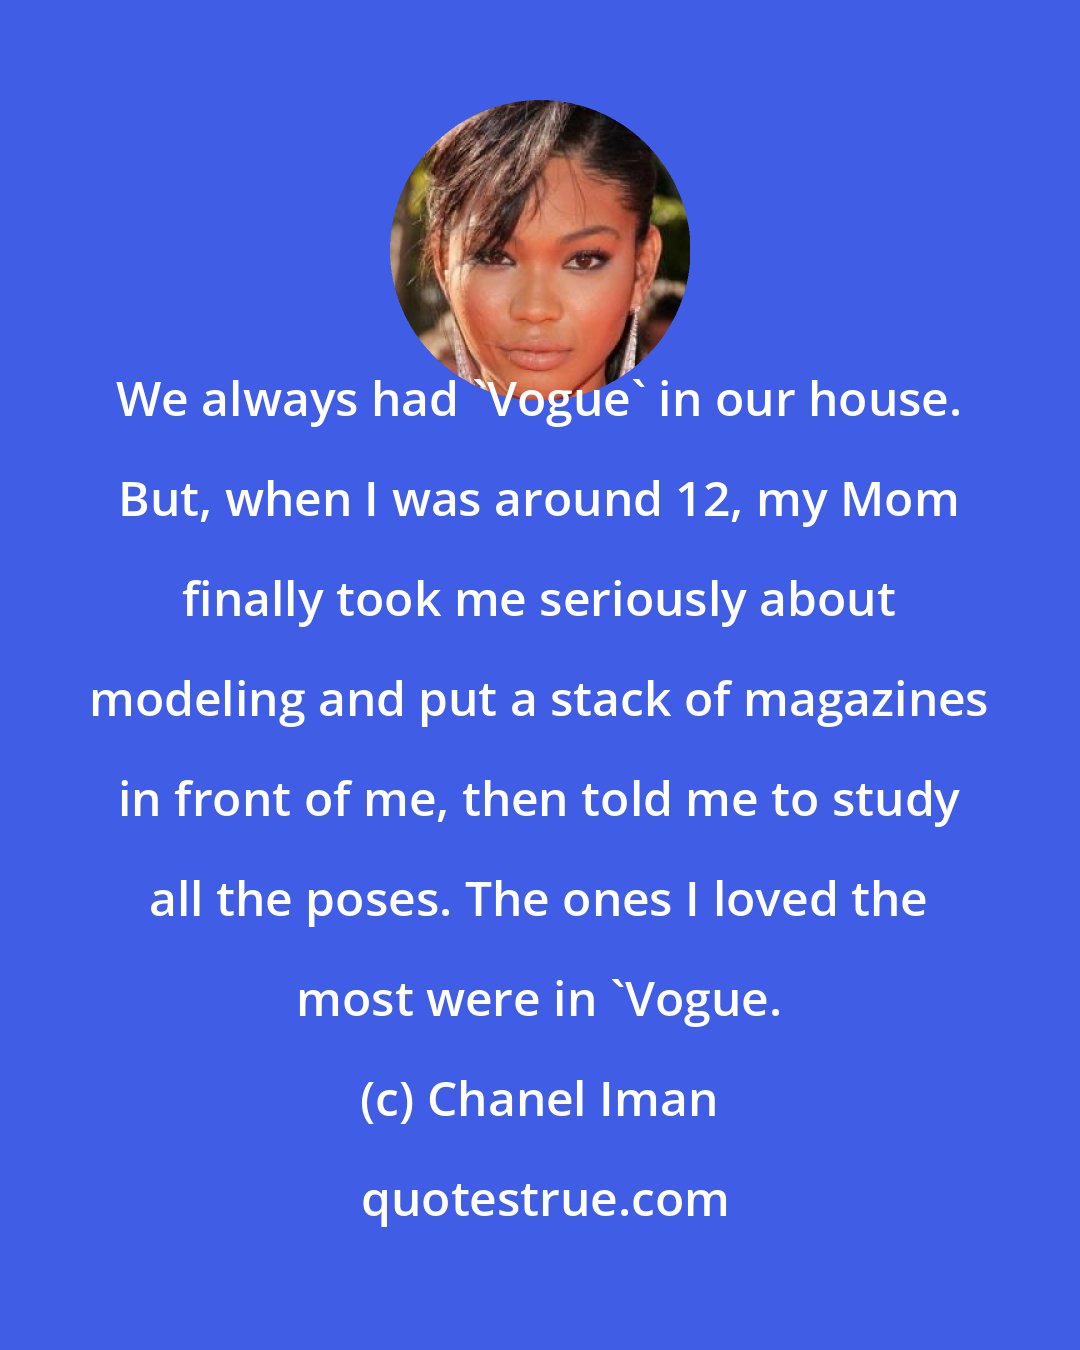 Chanel Iman: We always had 'Vogue' in our house. But, when I was around 12, my Mom finally took me seriously about modeling and put a stack of magazines in front of me, then told me to study all the poses. The ones I loved the most were in 'Vogue.